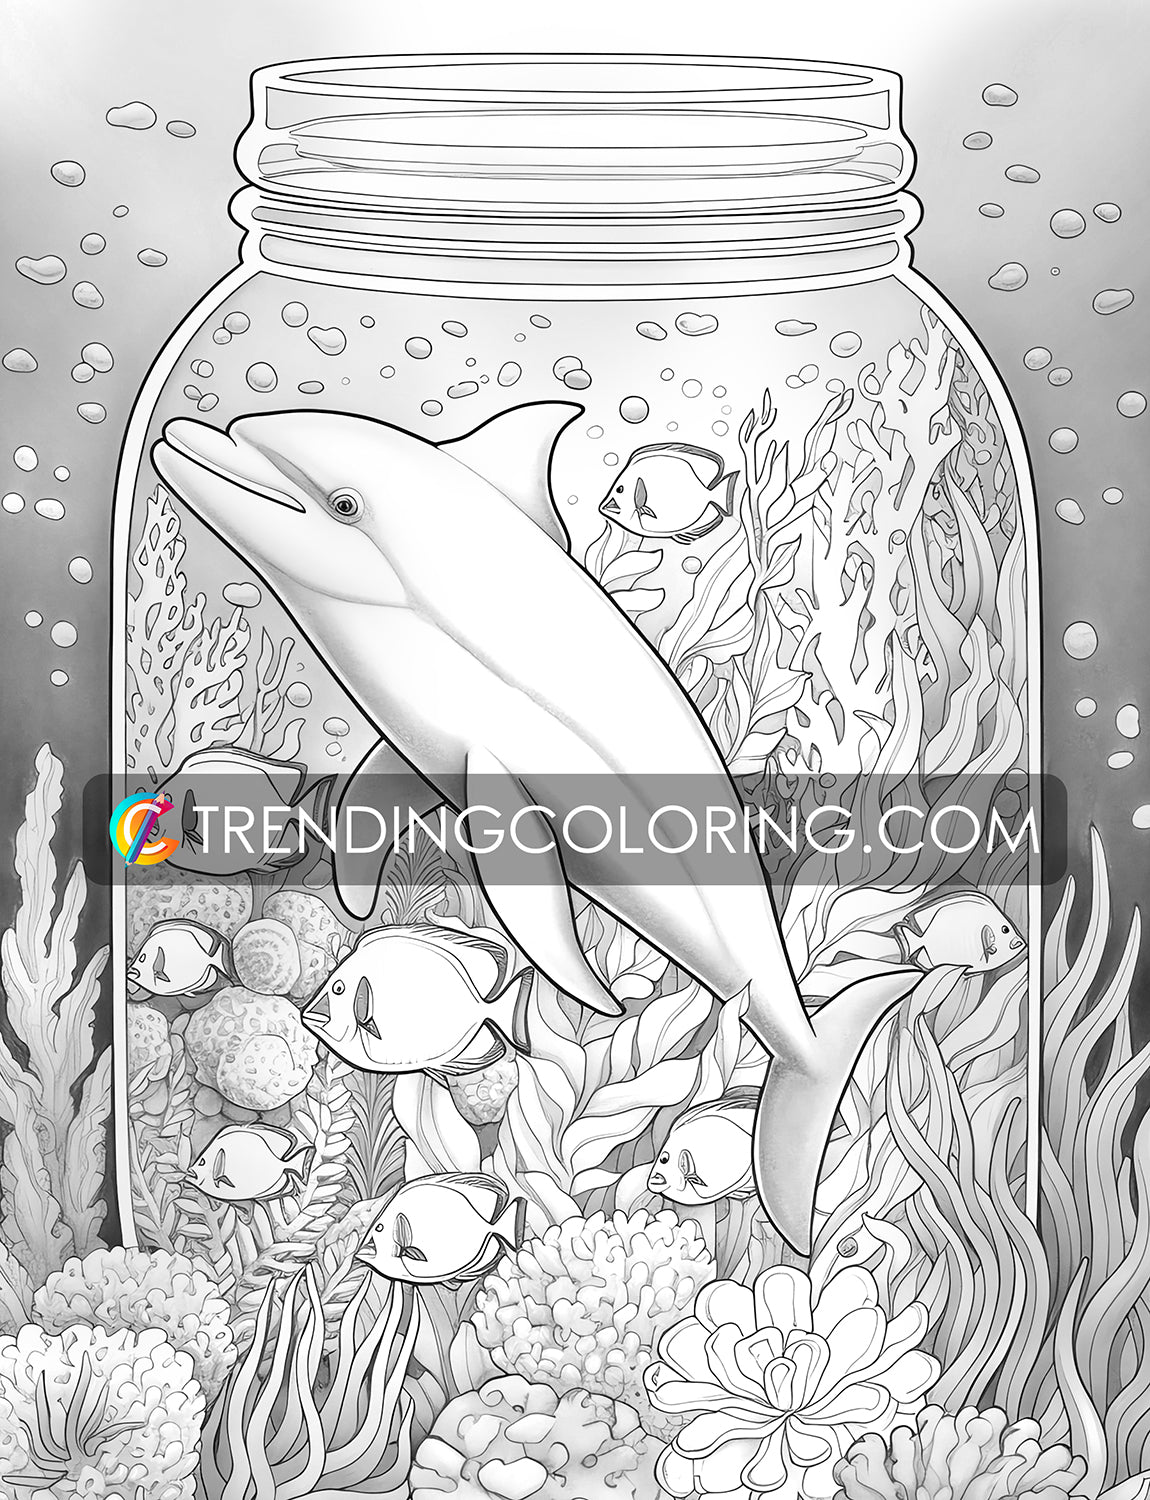 25 Ocean In Jar Grayscale Coloring Pages - Instant Download - Printable Dark/Light